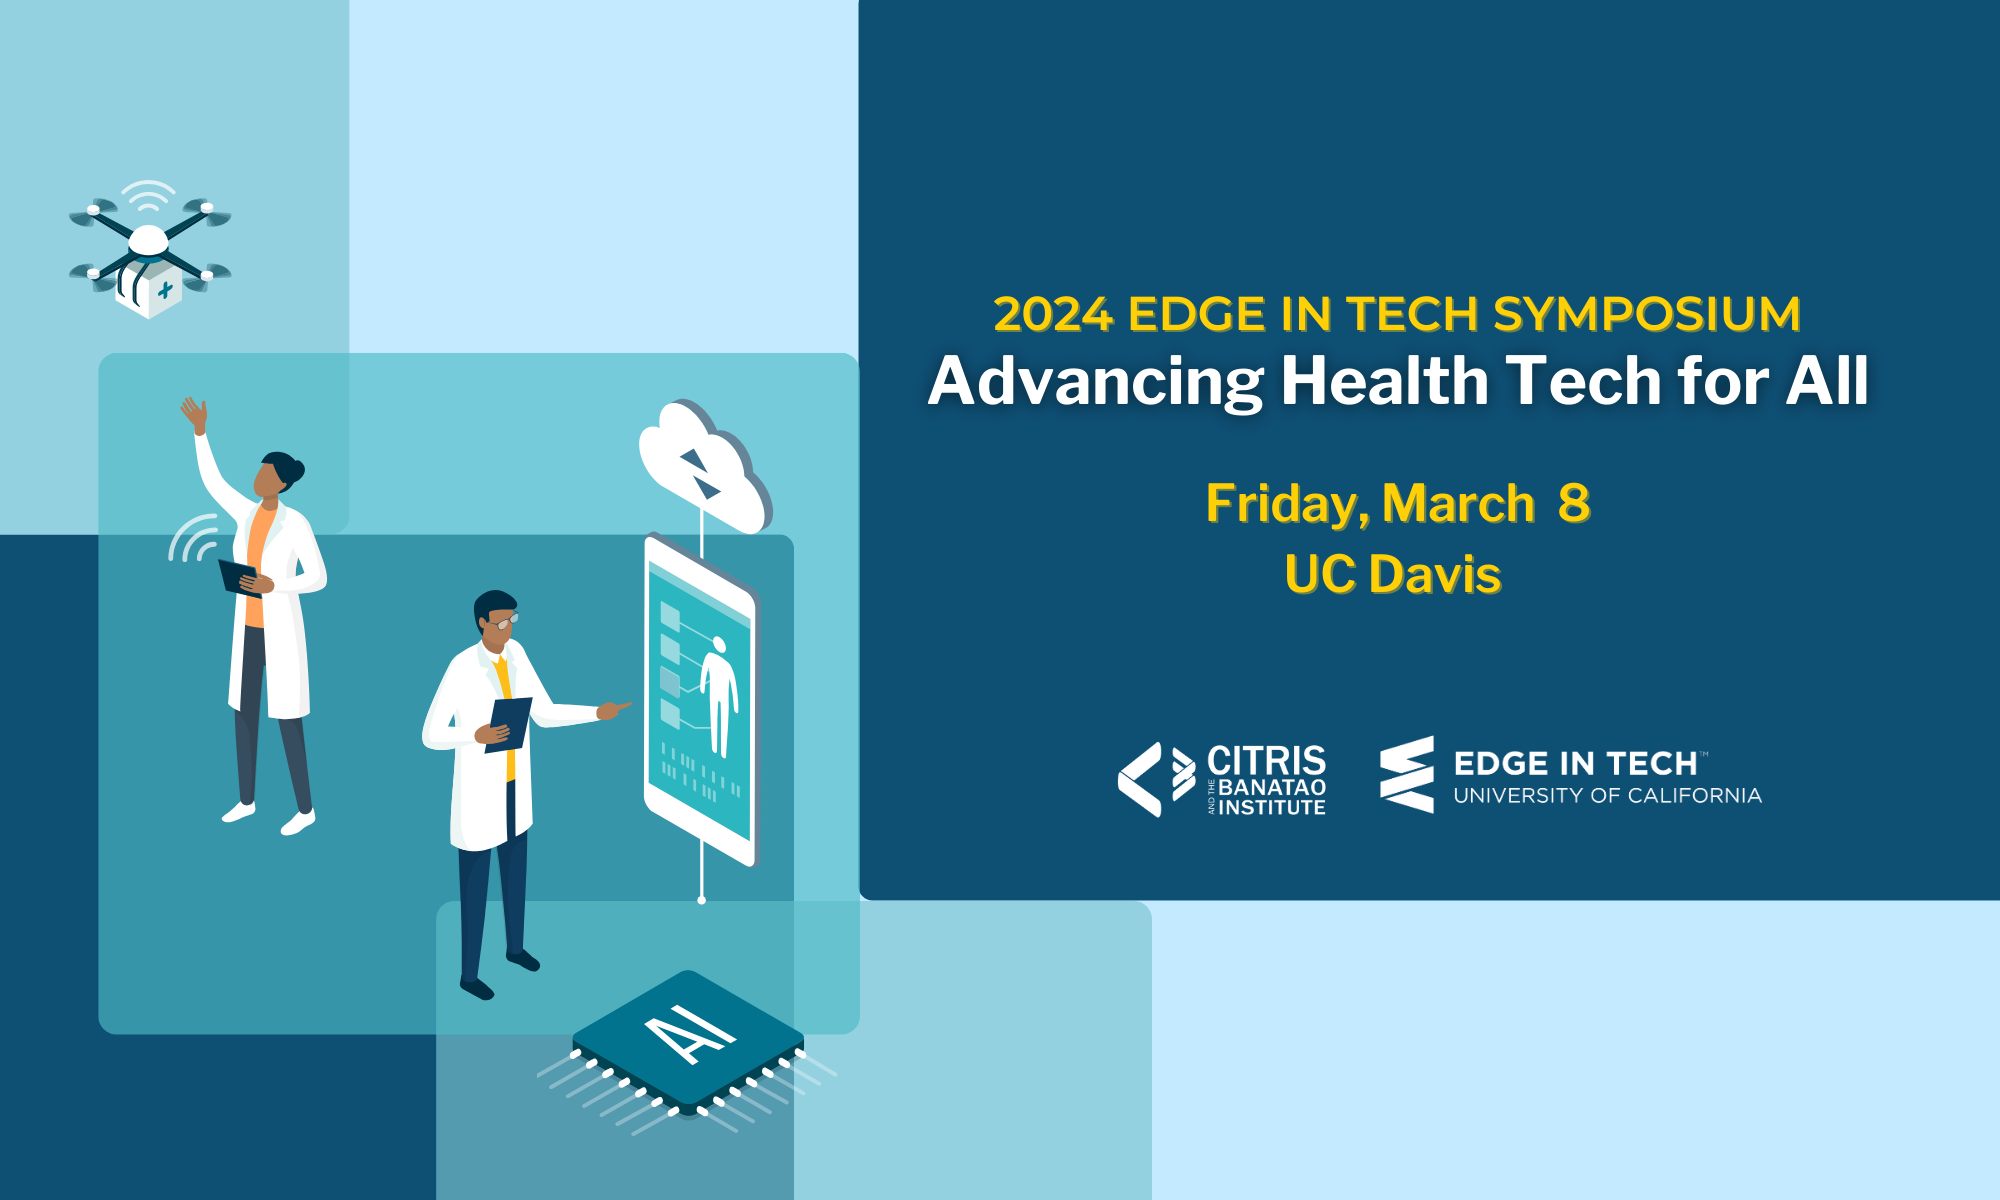 EDGE in tech symposium 2024 - Advancing Health Tech for All - March 8, UC Davis